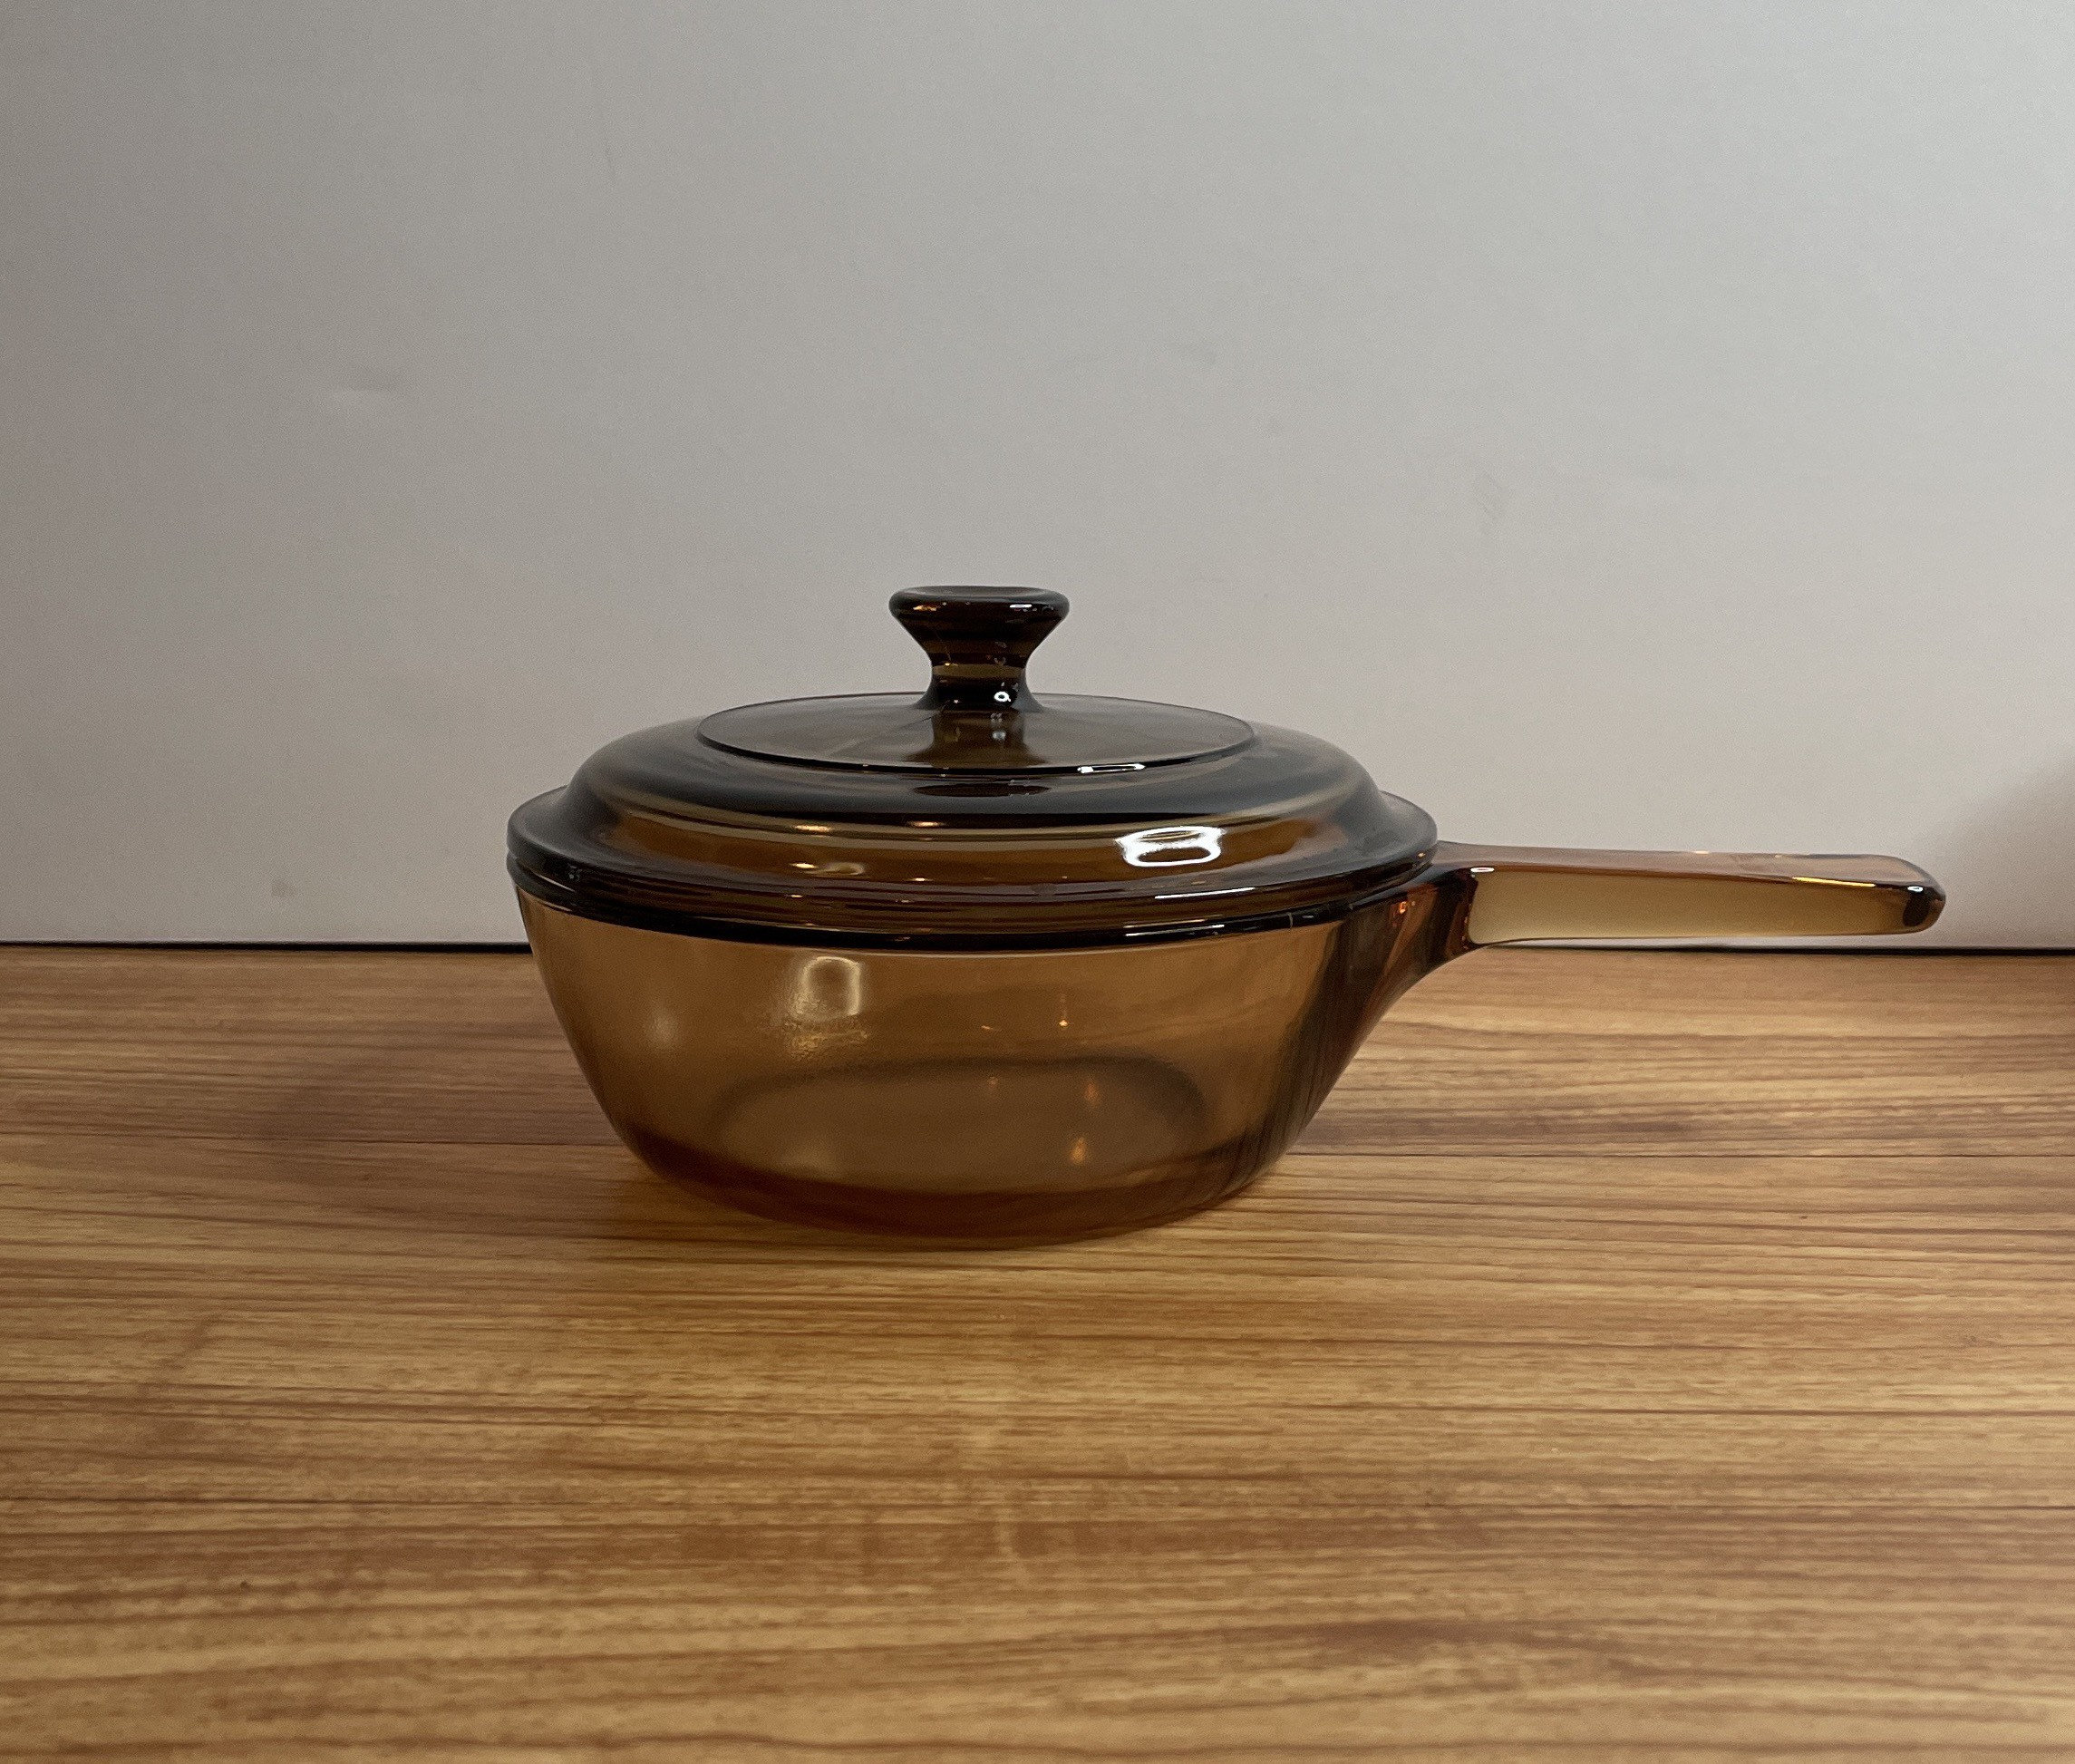 3/4 Quart 3 Cups Visions Sauce Pan With Spout 7 Liter Brown Amber Pyrex  Glass Pot france Vintage Corning Vision Cookware 